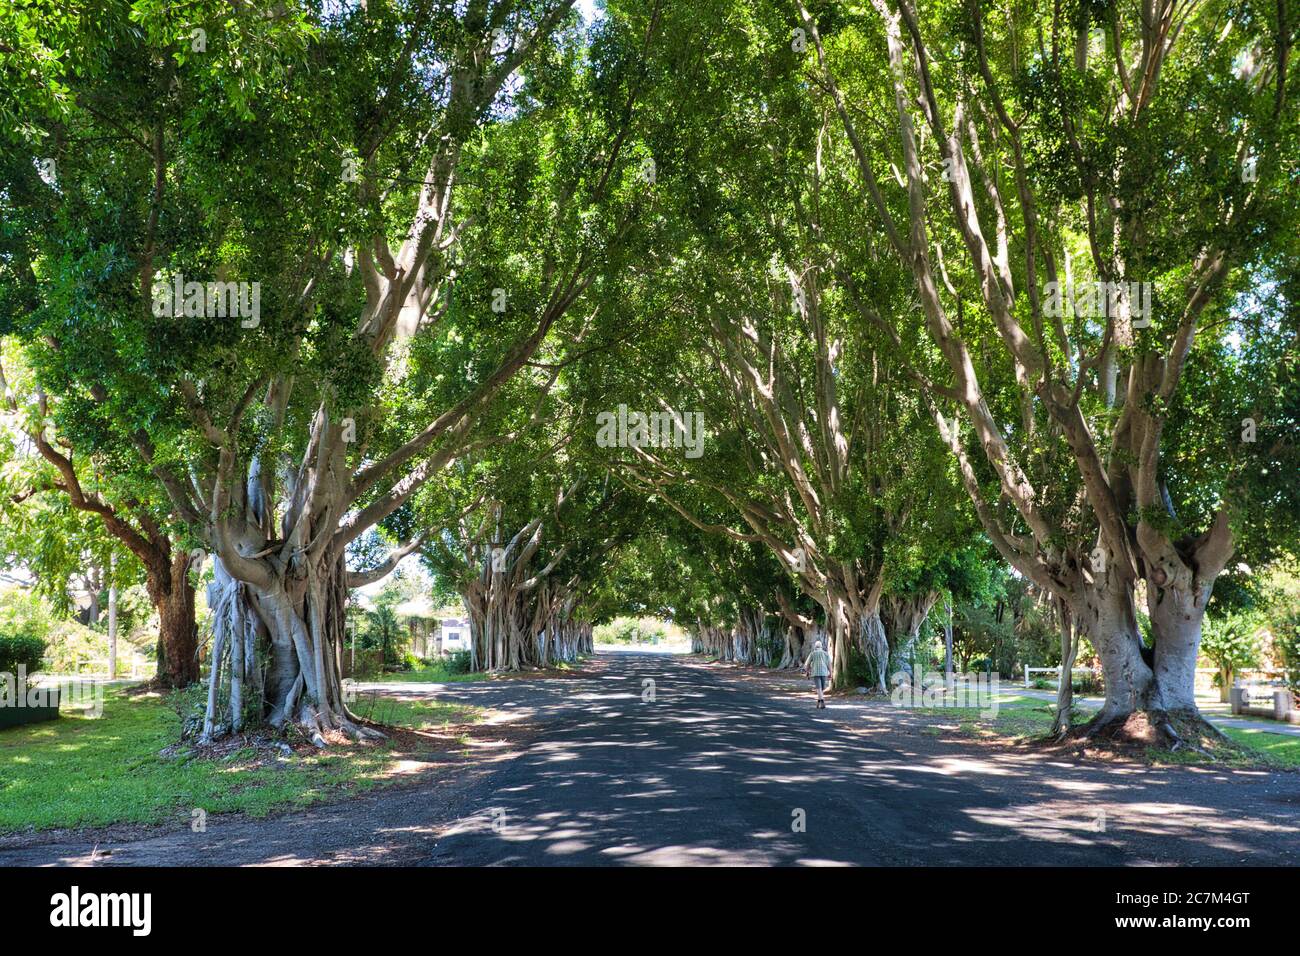 A peaceful scene looking down an avenue of wild fig trees forming an overhead archway at Grafton, on the mid east coast of New South Wales, Australia Stock Photo